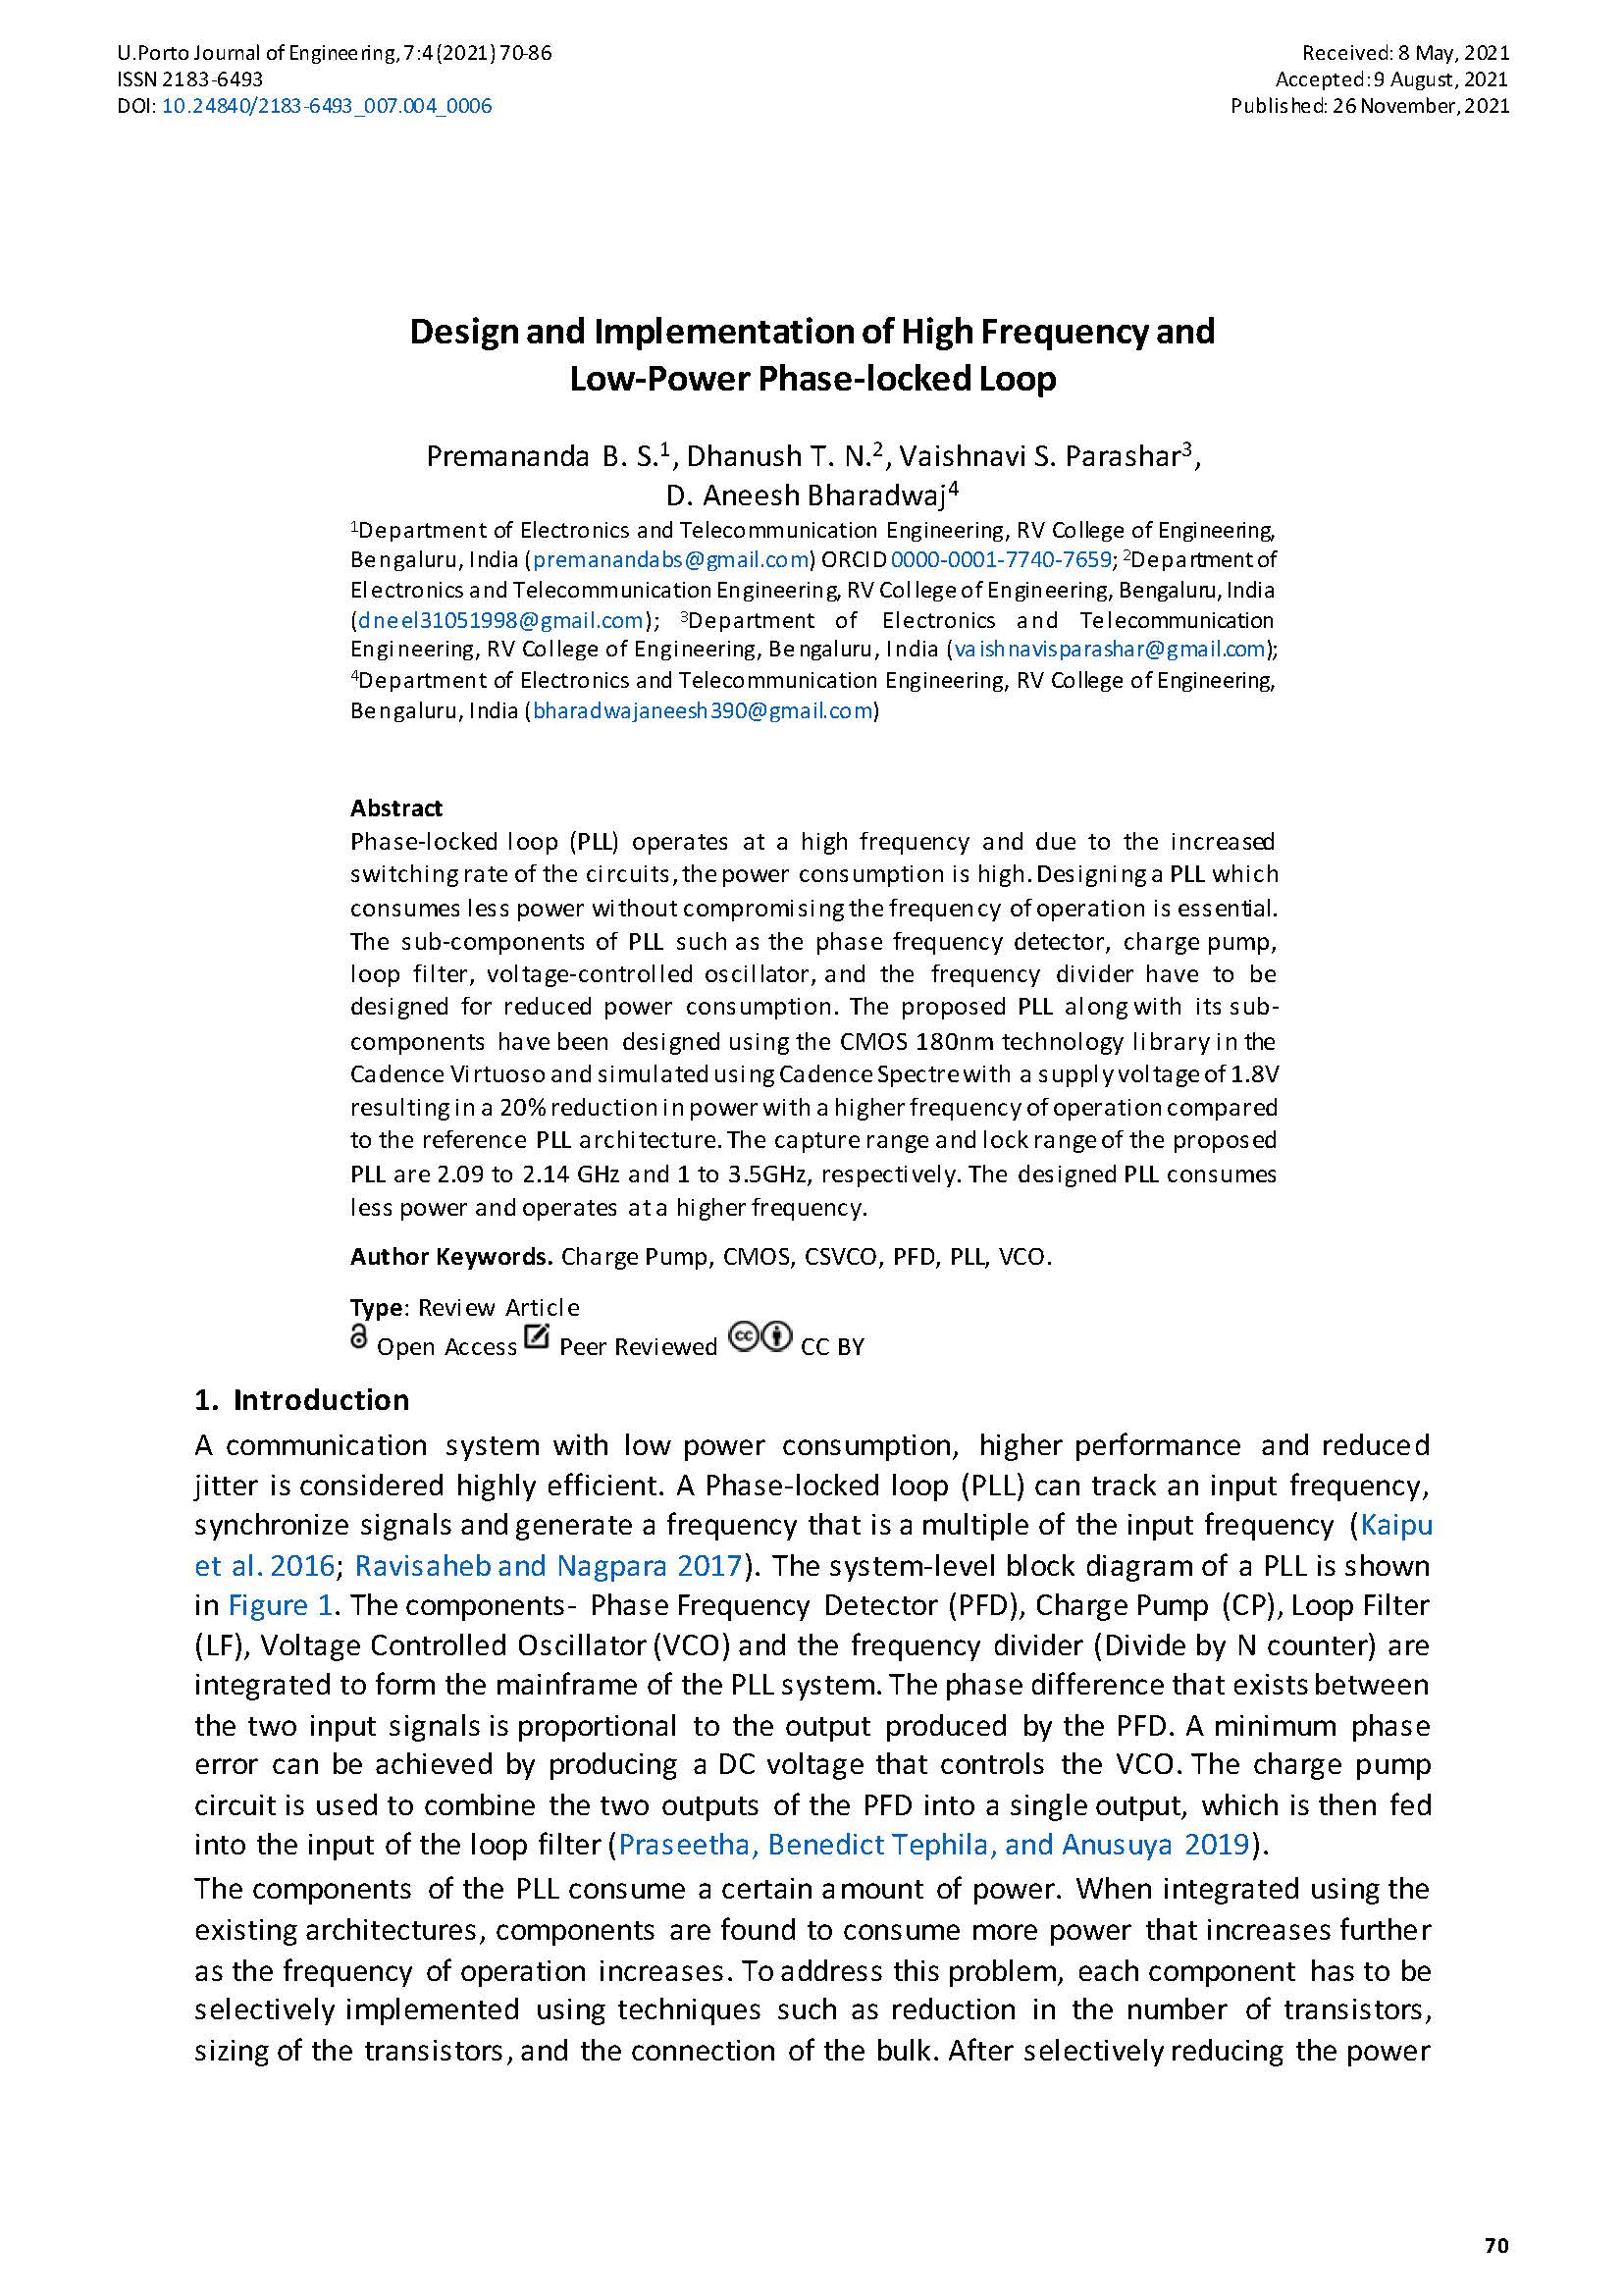 Design and Implementation of High Frequency and Low-Power Phase-locked Loop